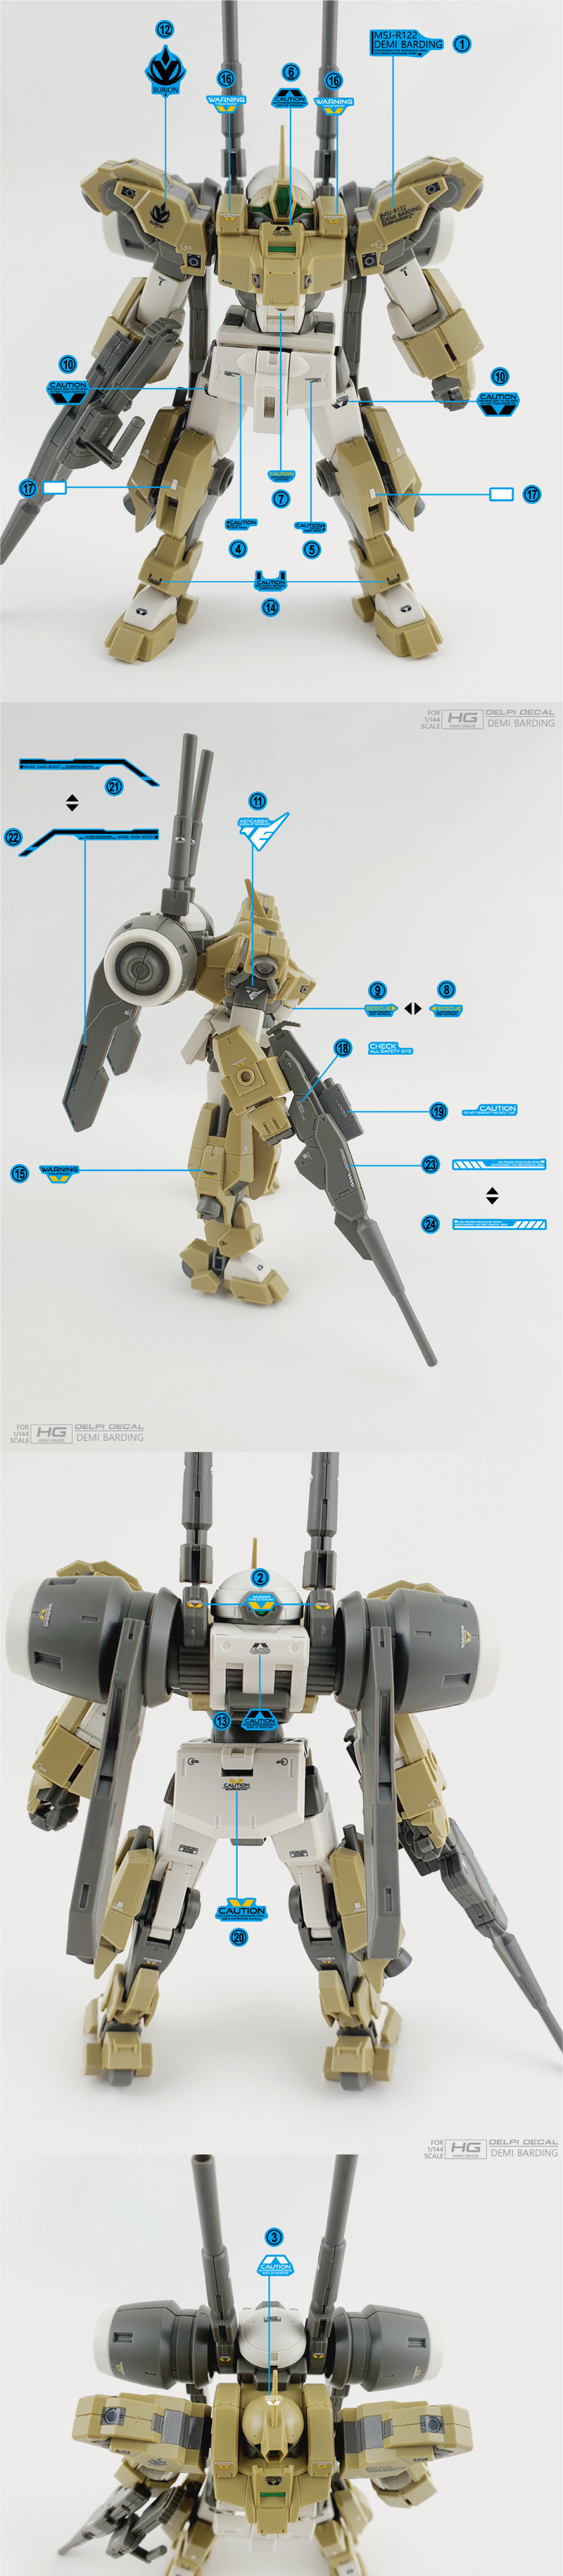 Delpi Decal - HG Demi Barding Water Decal